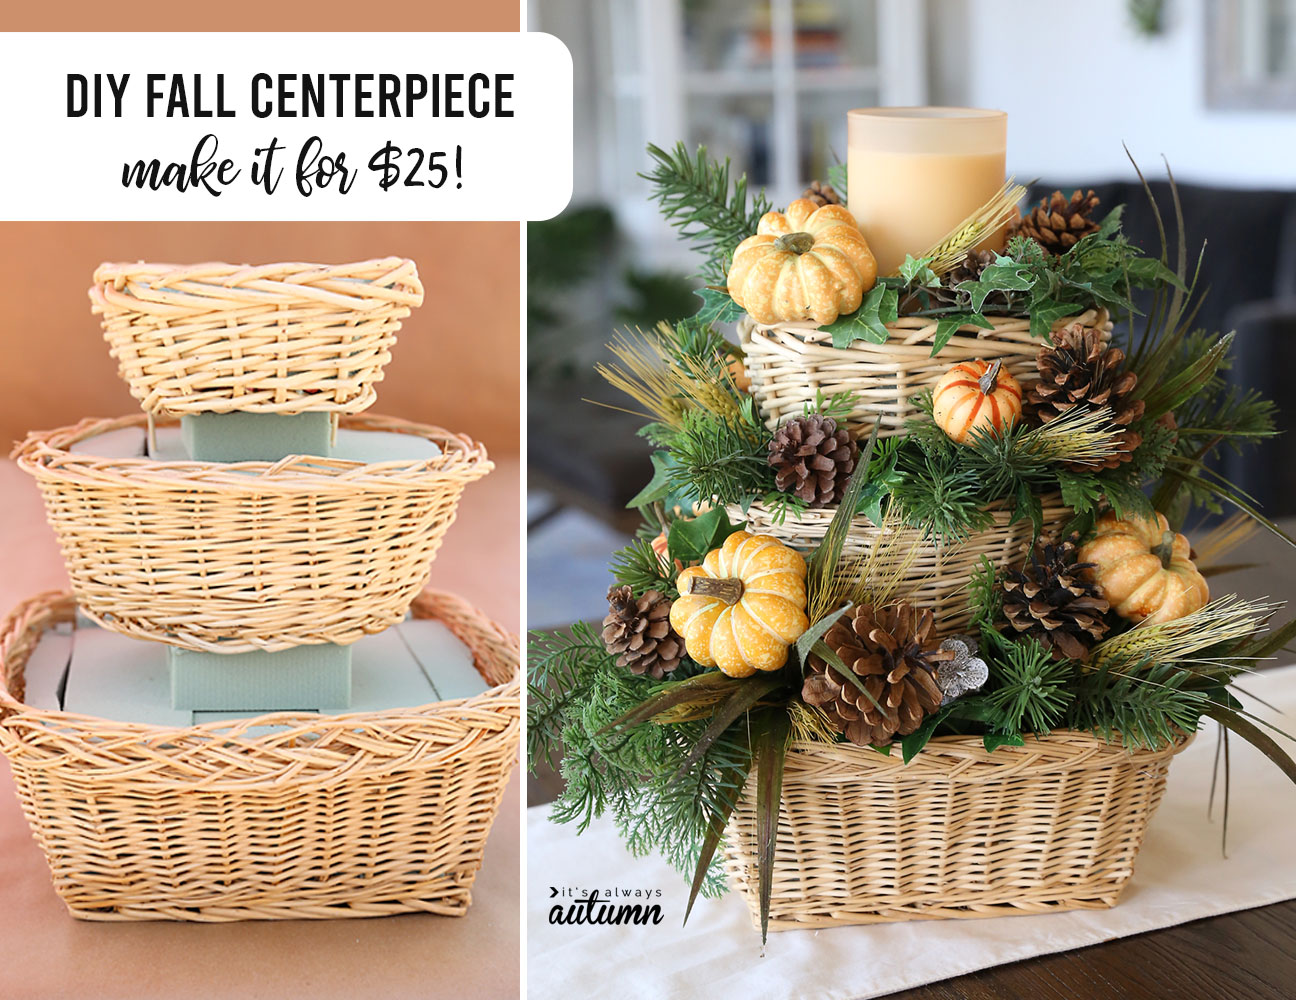 DIY Fall Centerpiece: make it for $25!